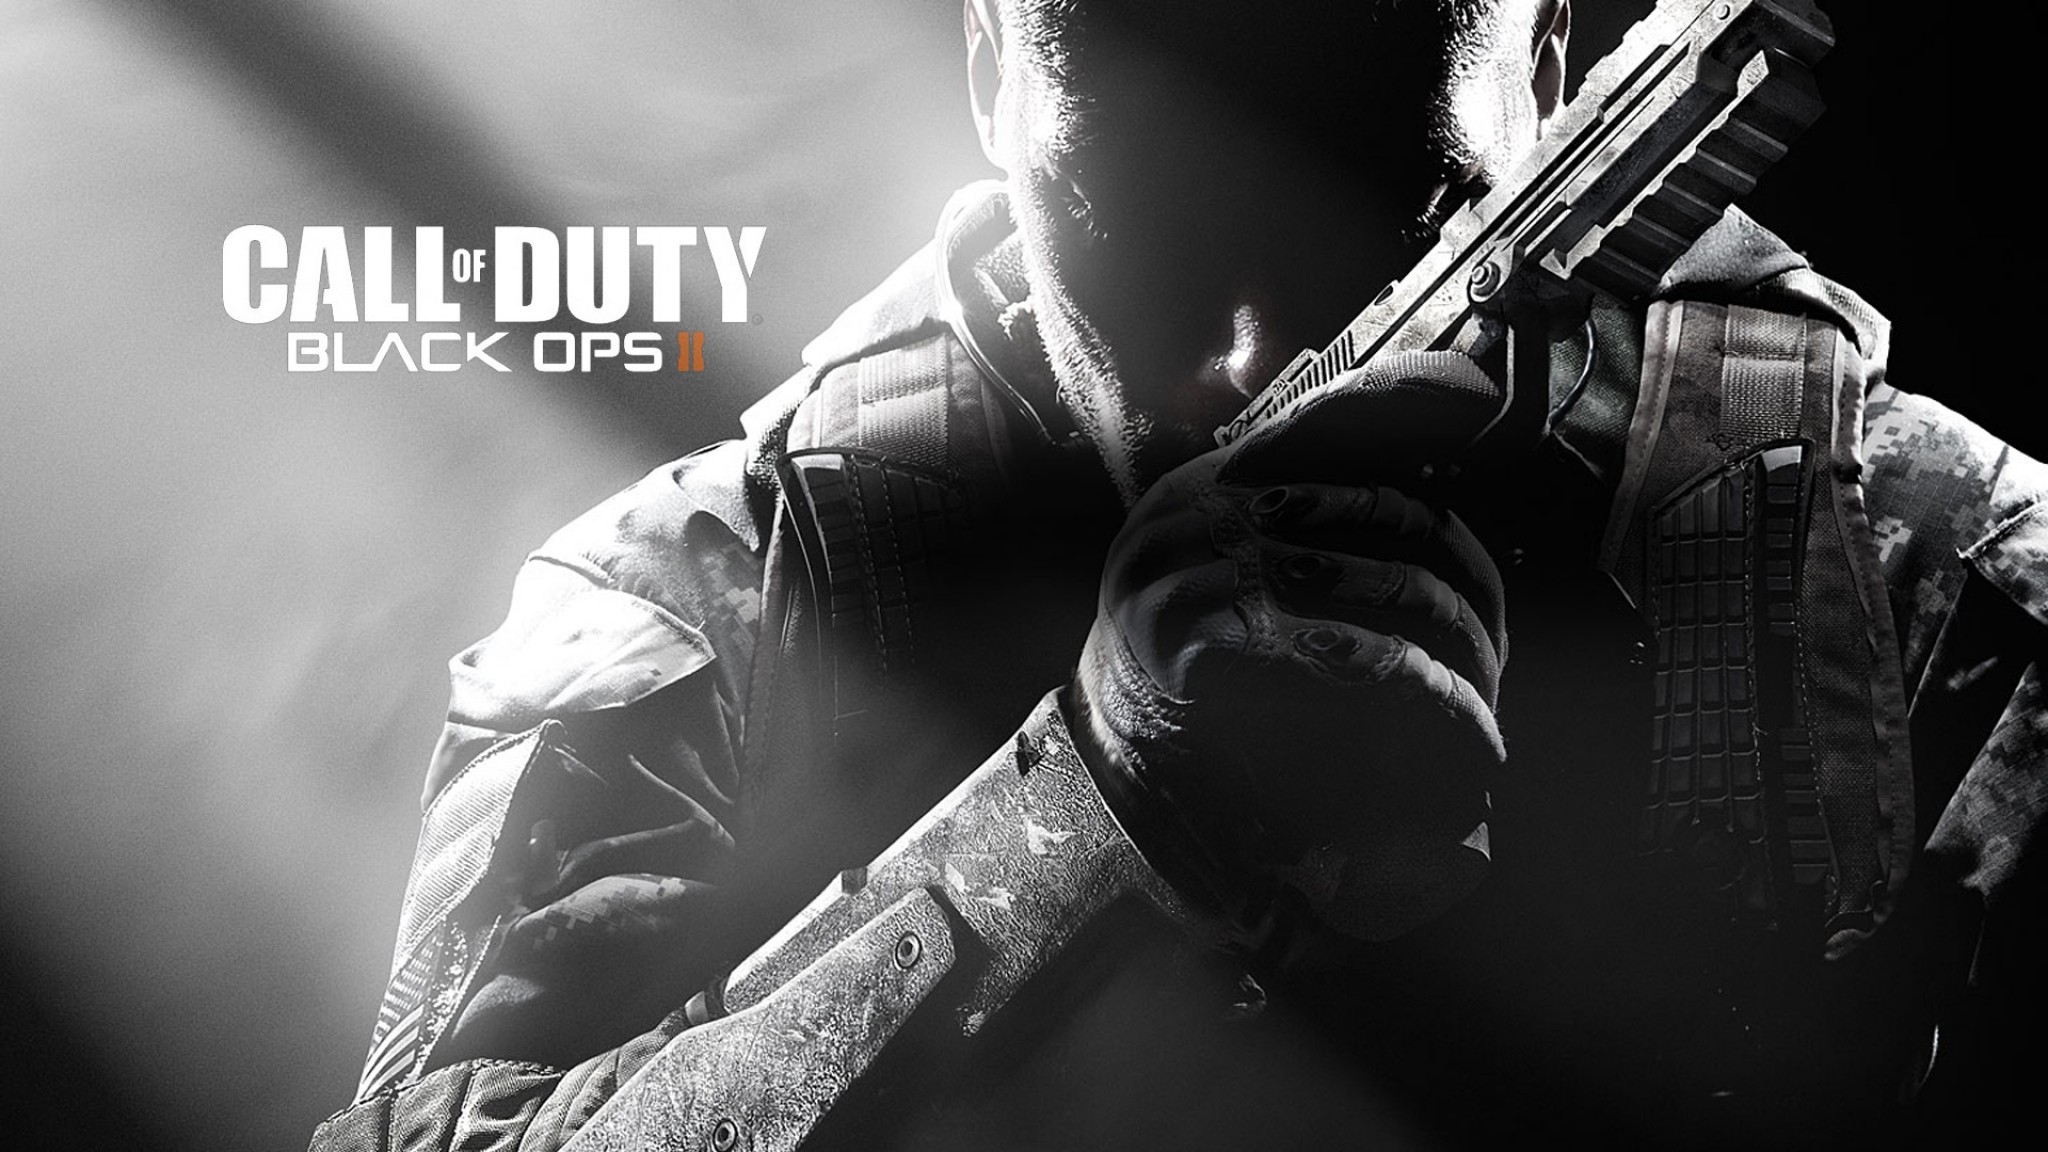 2048x1152  Wallpaper Call Of Duty, Black Ops 2, Soldiers, Weapons, Shooter.  Original Resolution